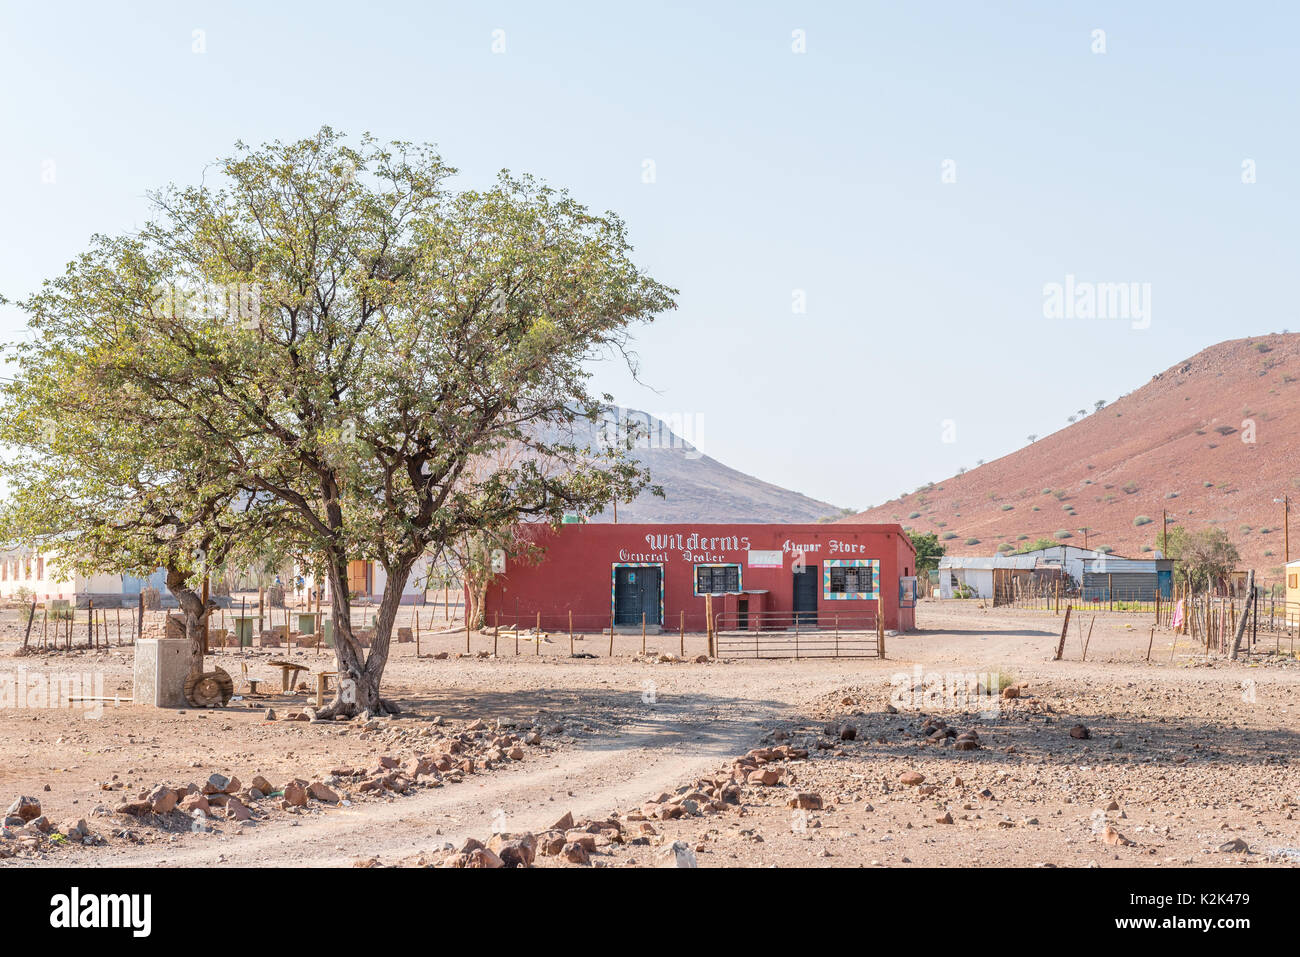 BERGSIG, NAMIBIA - JUNE 28, 2017: A supermarket and liquor store in Bergsig, a small village in the Kunene Region of Namibia Stock Photo